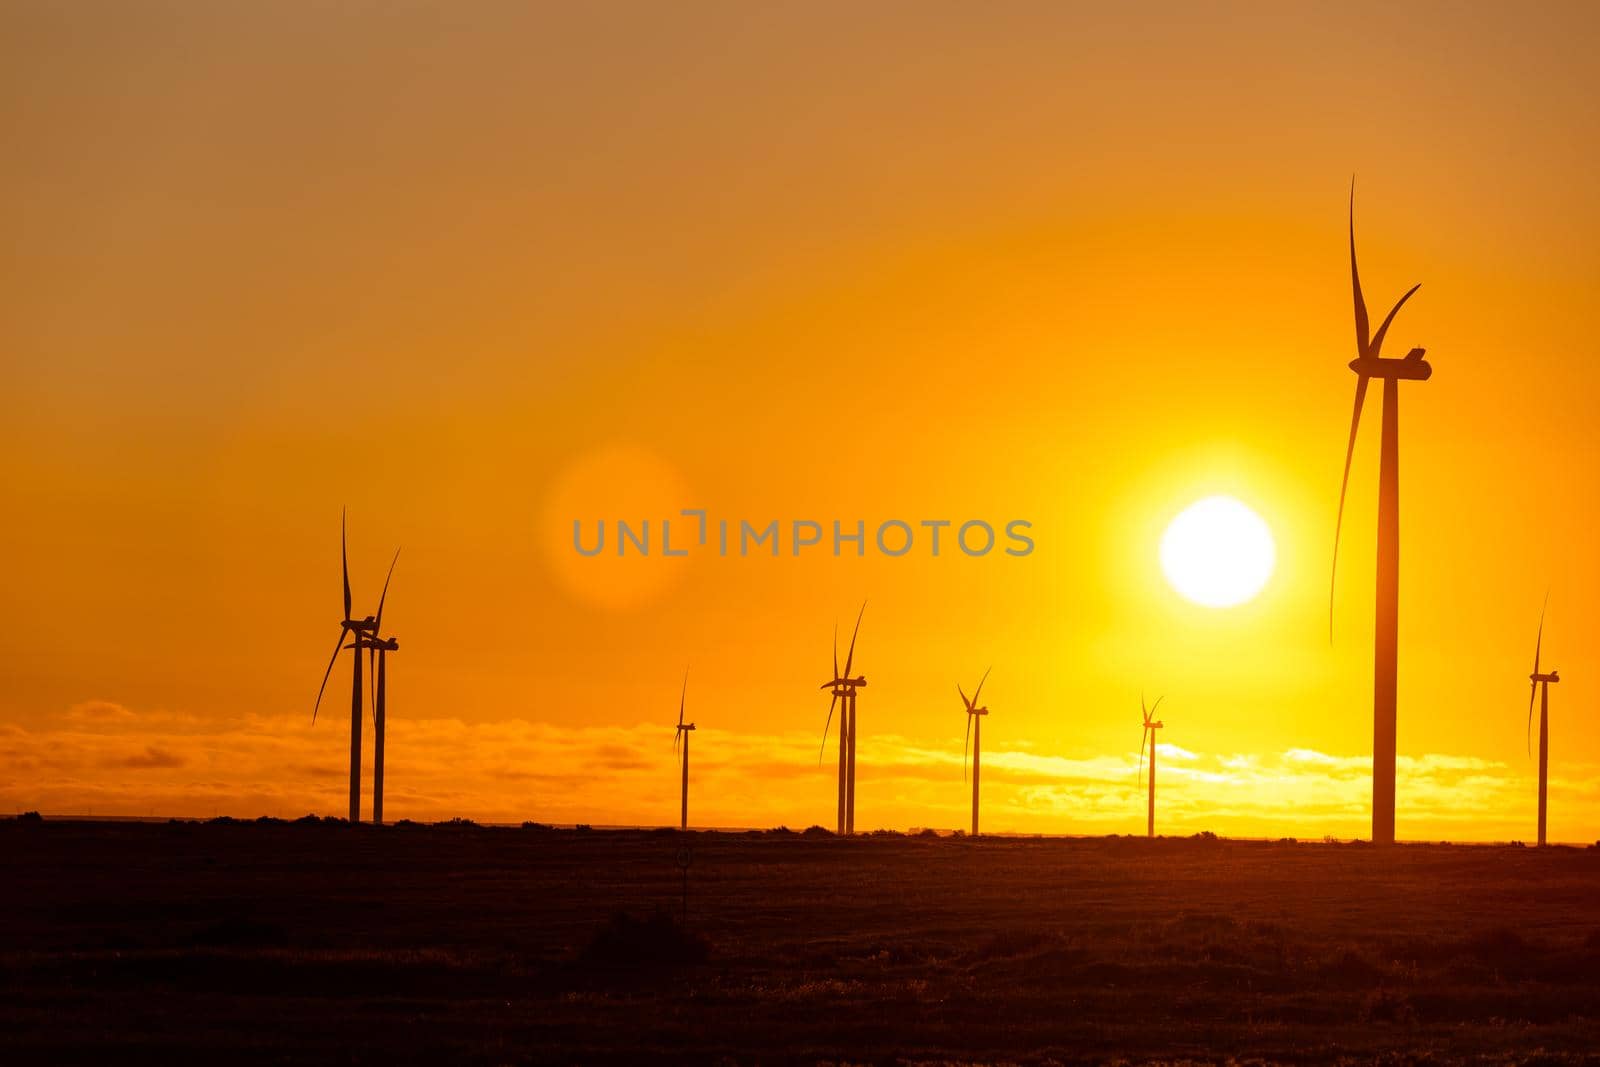 General view of wind turbines in countryside landscape during sunset. environment, sustainability, ecology, renewable energy, global warming and climate change awareness.